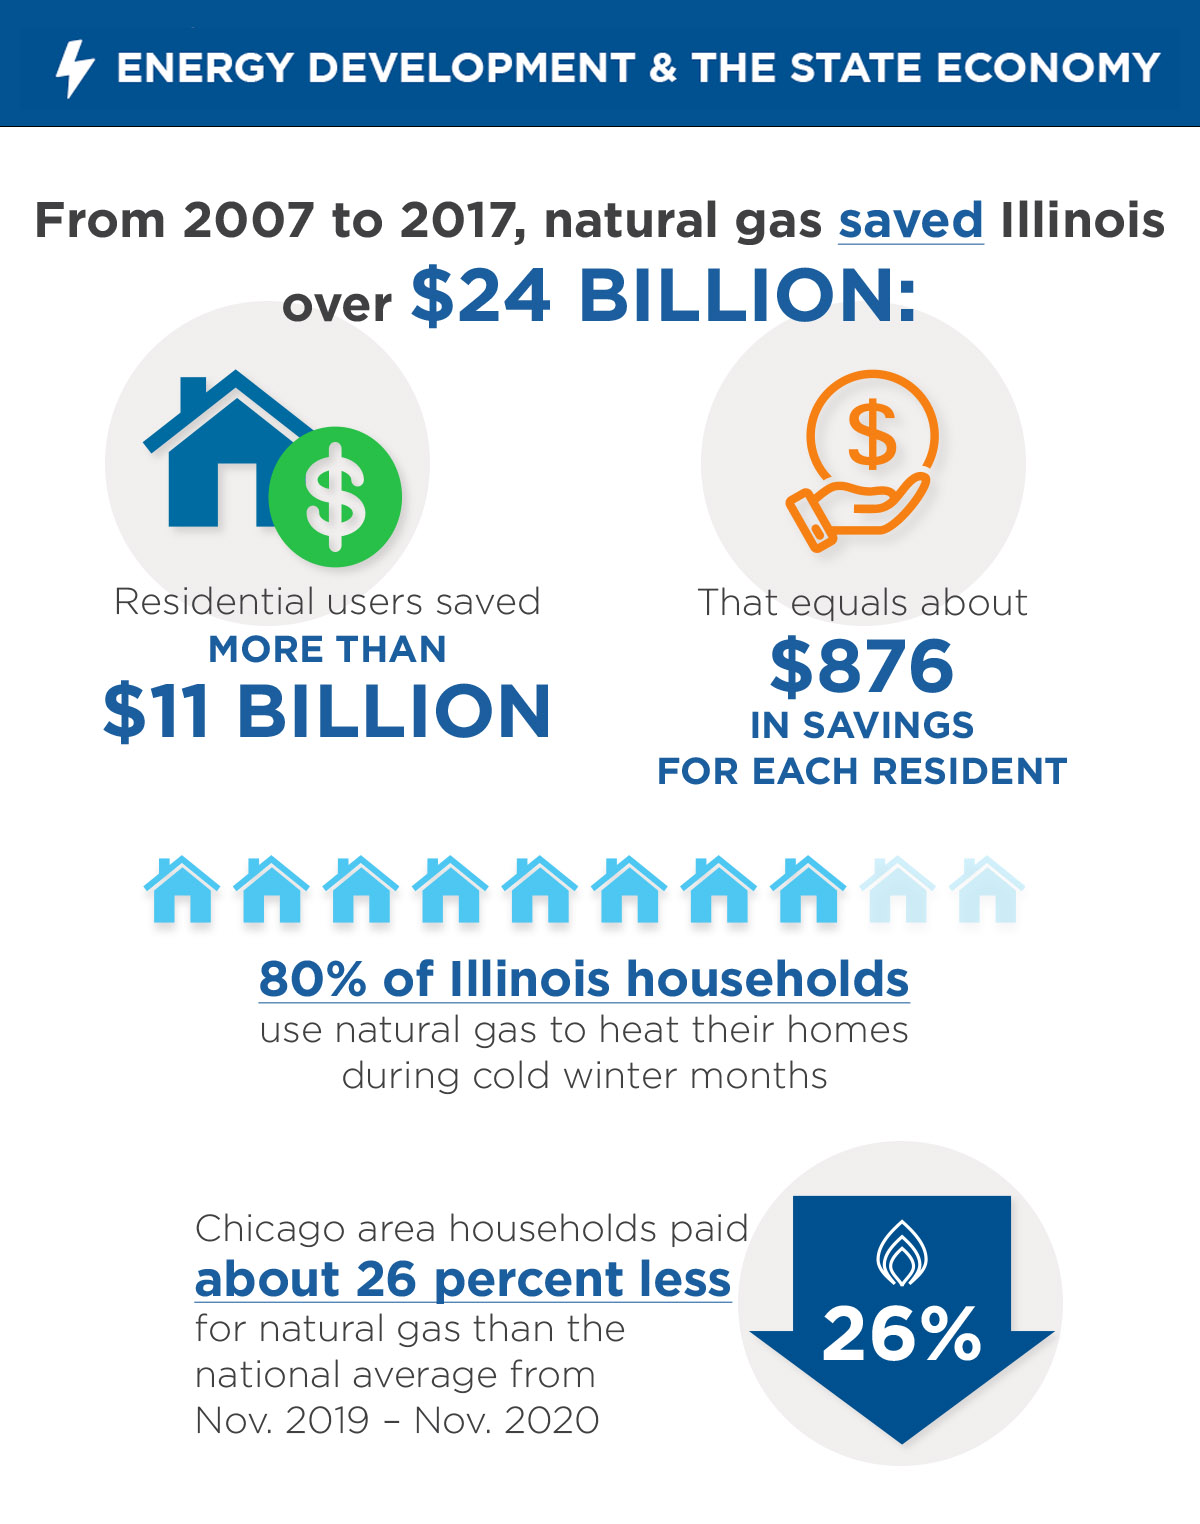 The benefits of natural gas for Illinois